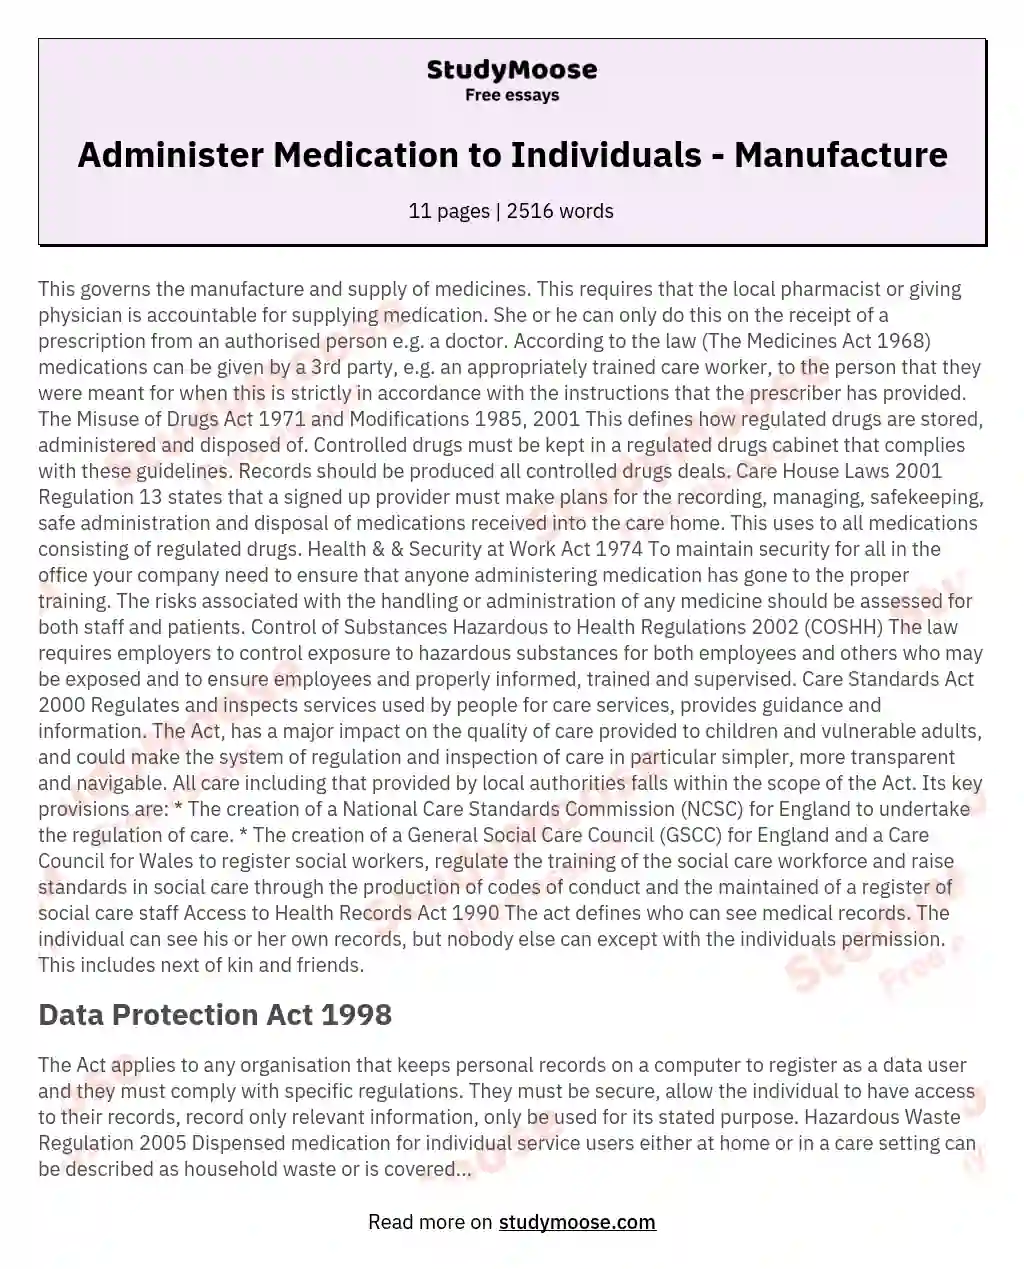 Administer Medication to Individuals - Manufacture essay